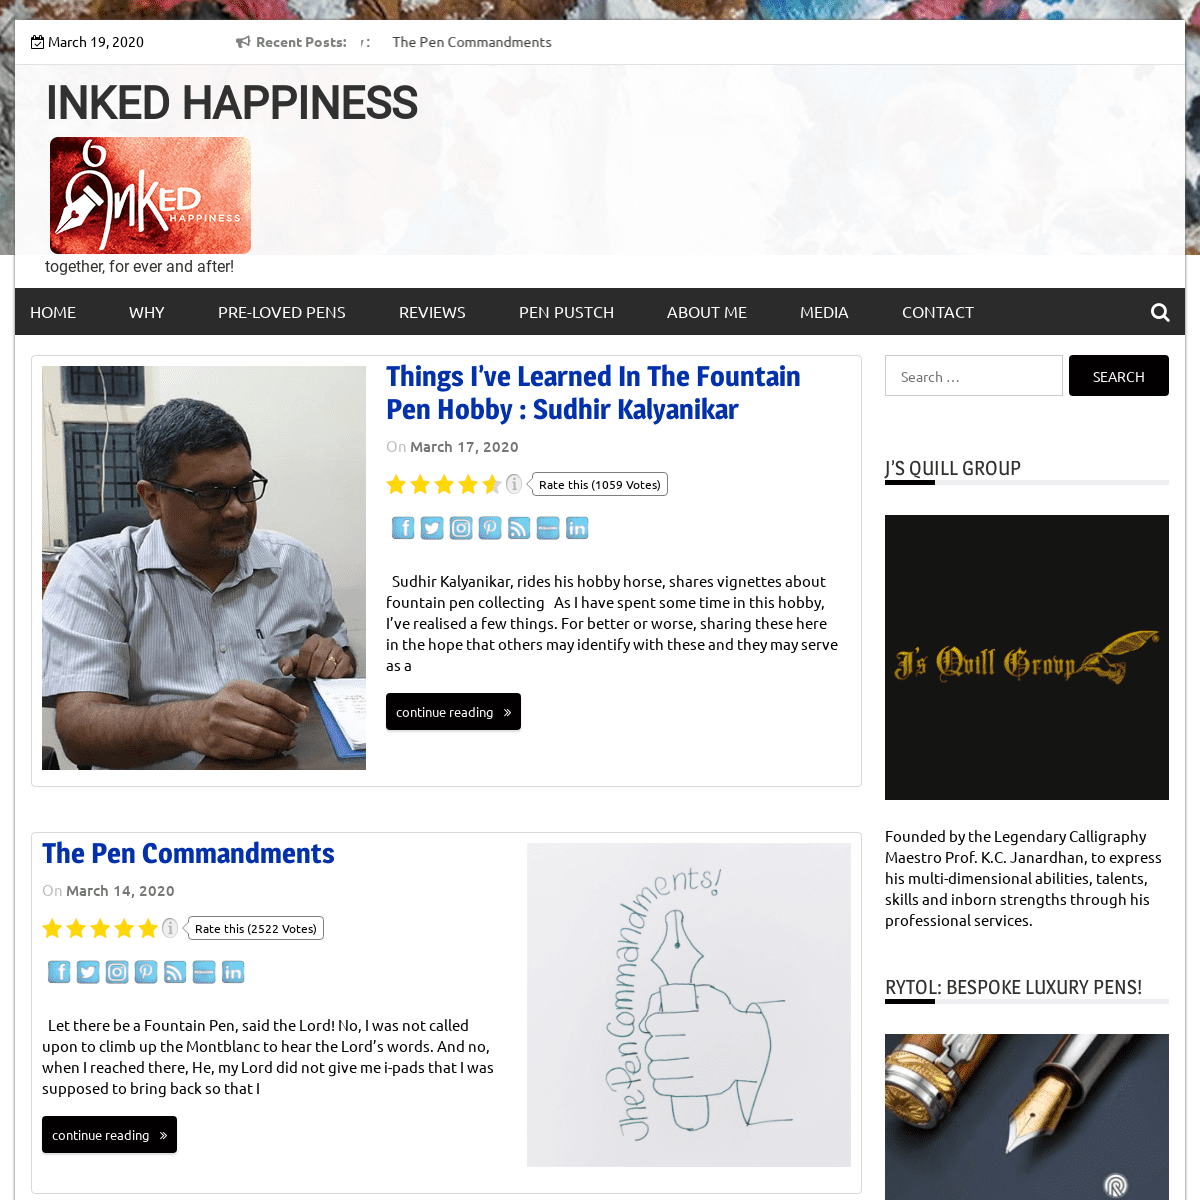 A complete backup of inkedhappiness.com